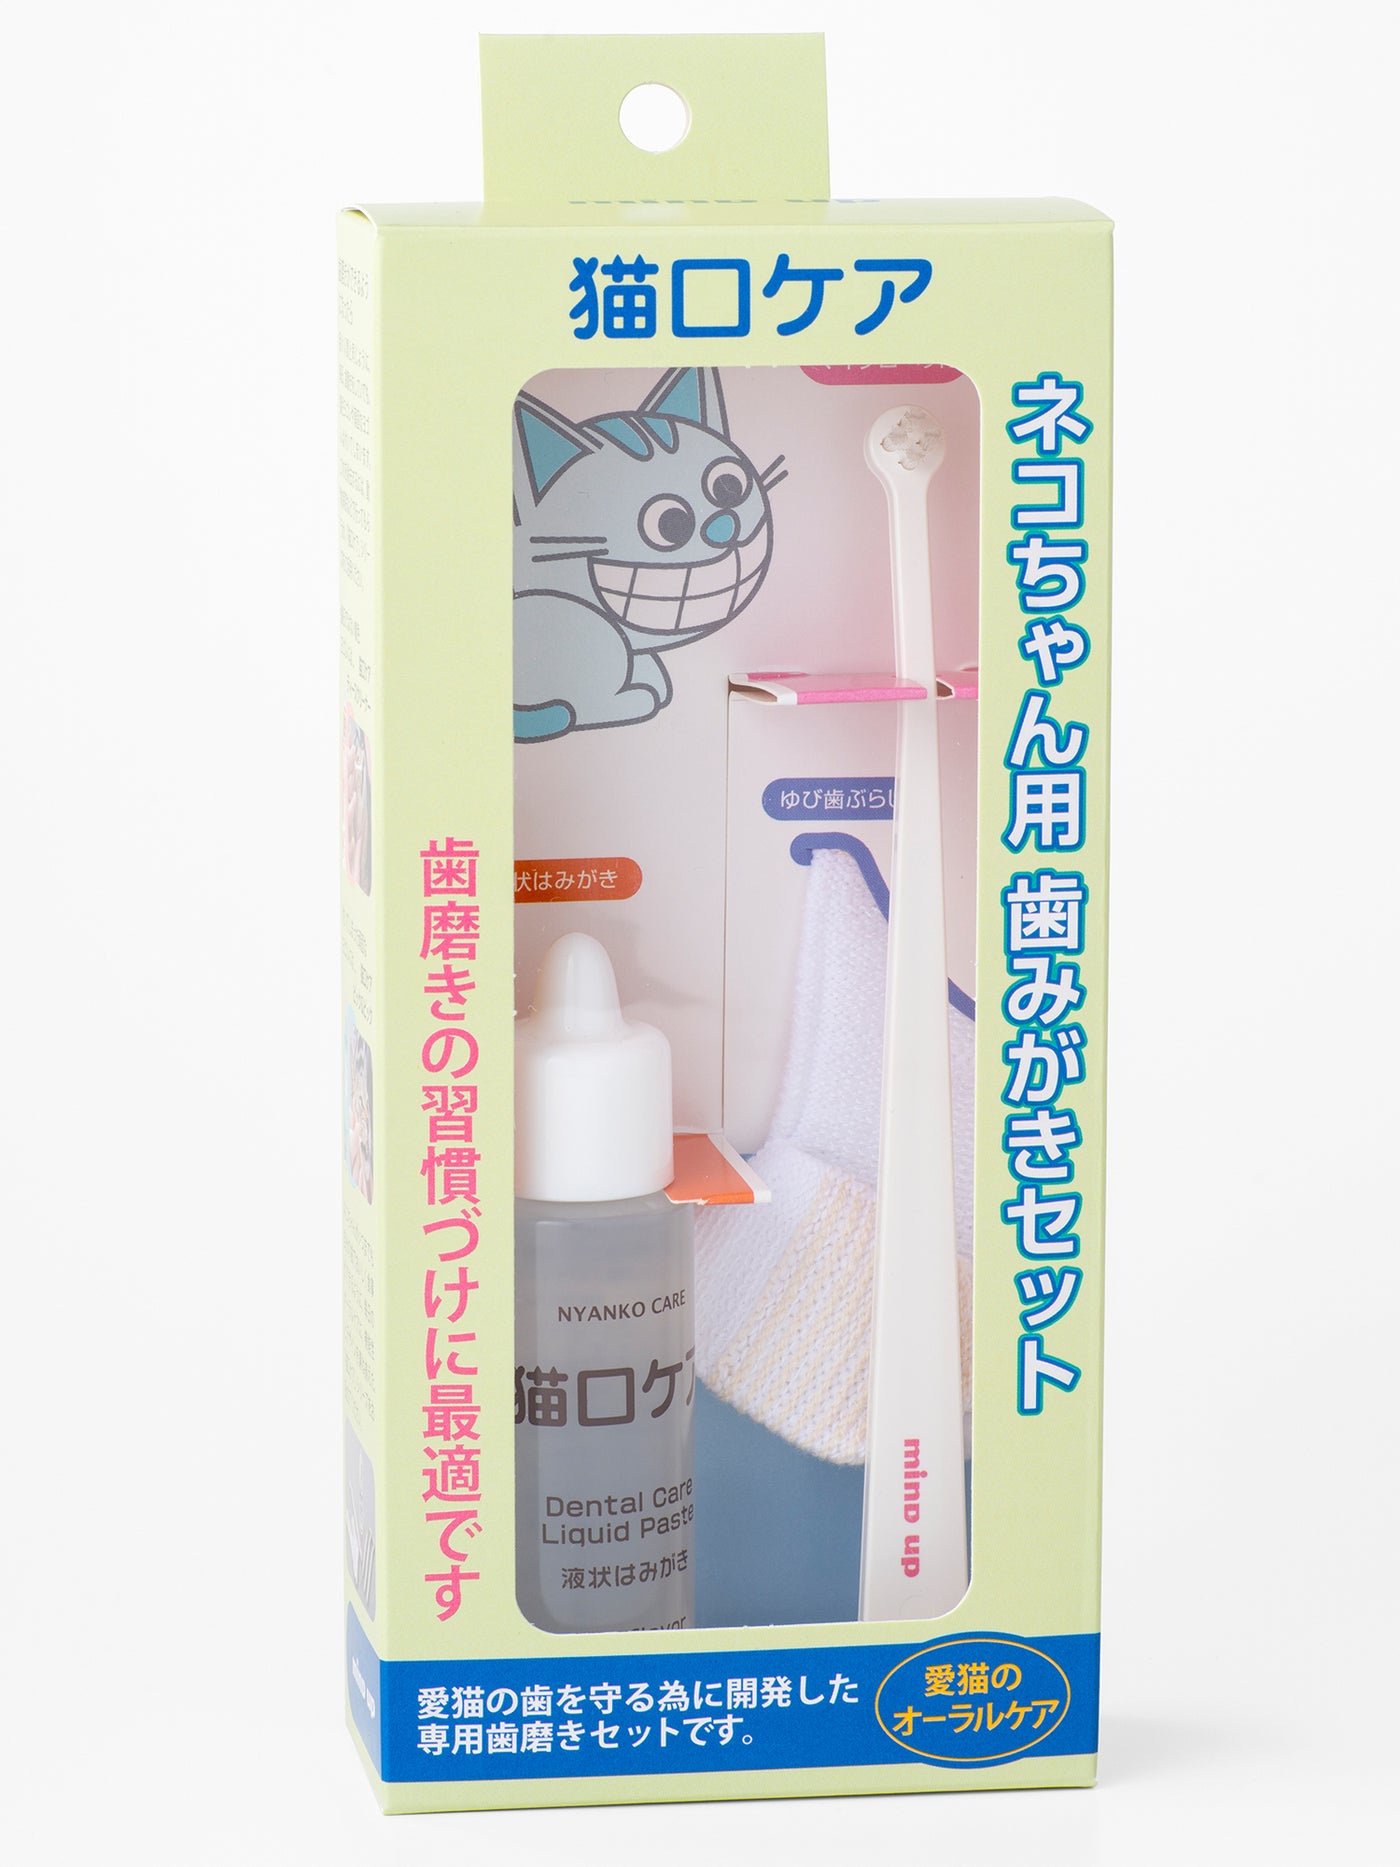 Mind Up Japan Cat Toothbrush, Toothpaste and More Dental Care Starter Kit